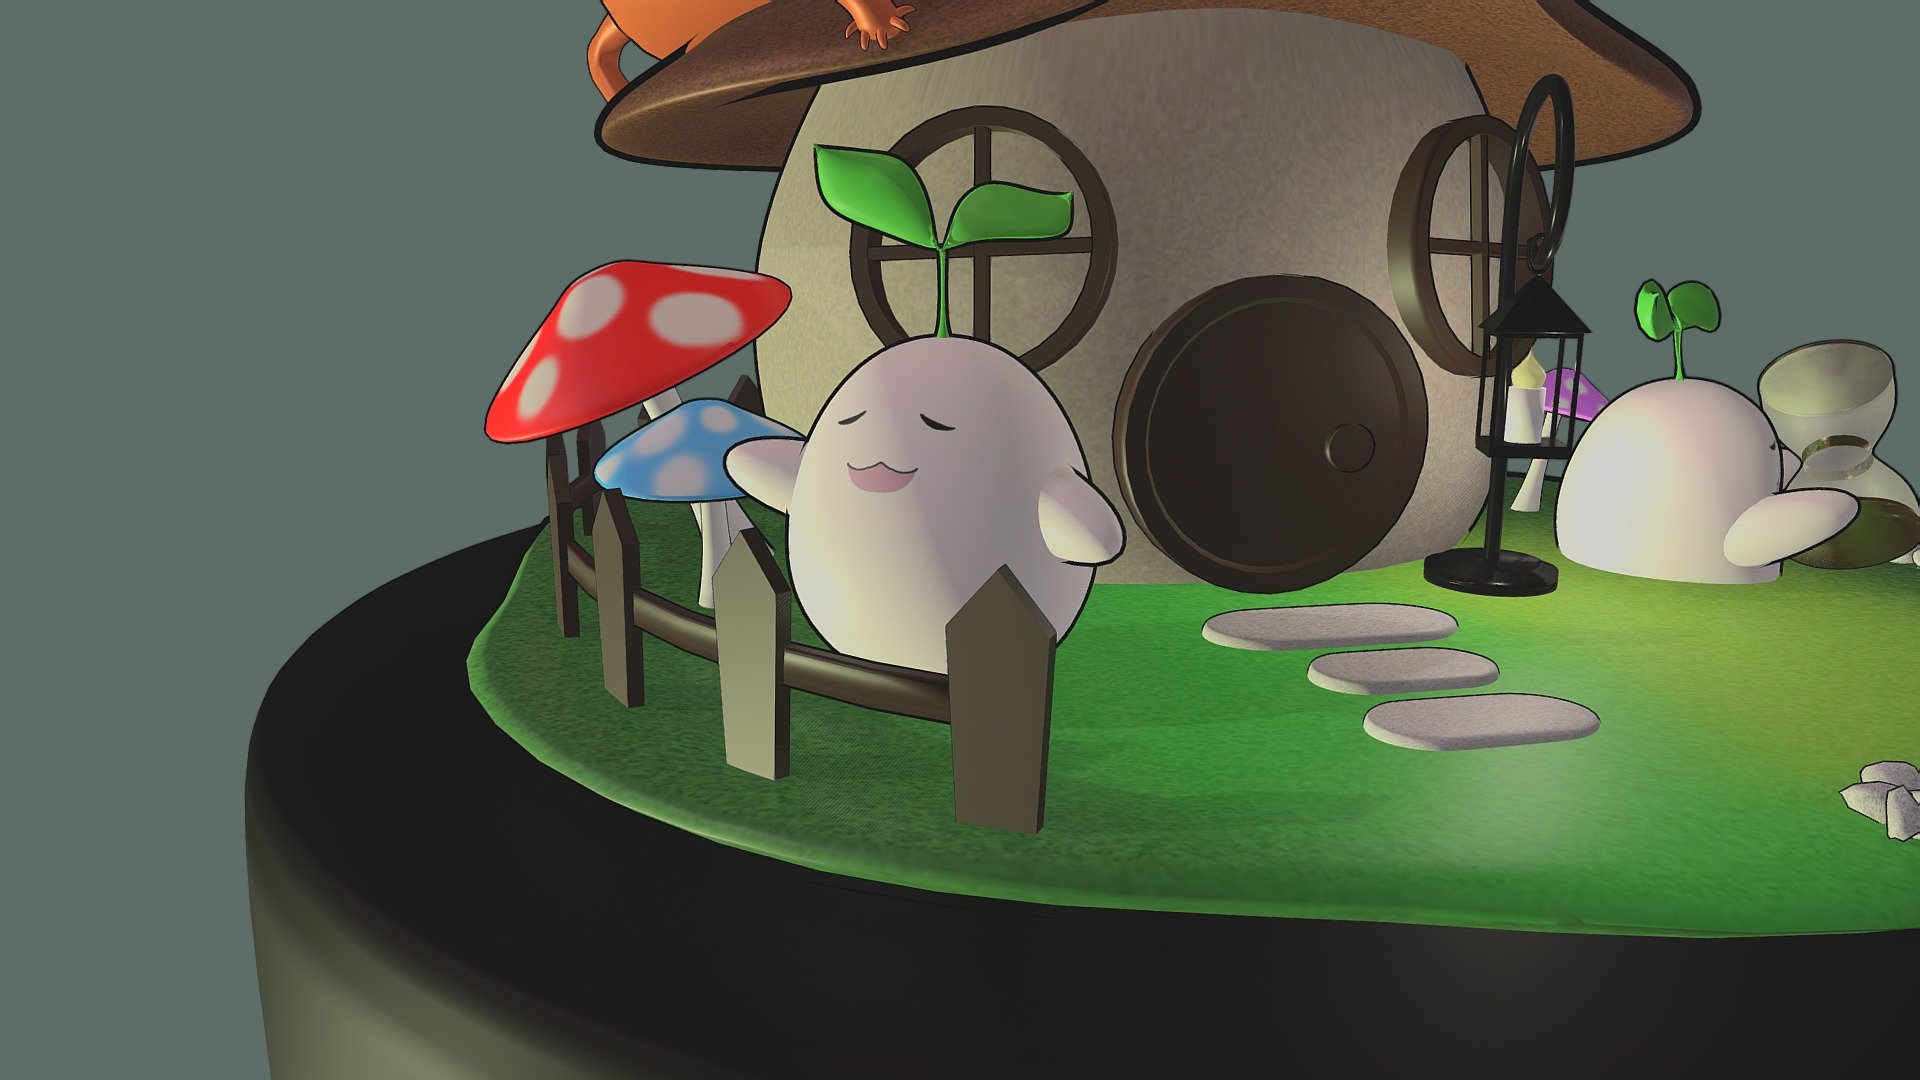 Afternoon project. It was really fun to create.I was inspired to create this in 3D after seeing pkking1288 sculpt.

Reference:
https://www.deviantart.com/pkking1288/art/Mandora-487556318 - Mandora - Download Free 3D model by Jhibeki 3d model